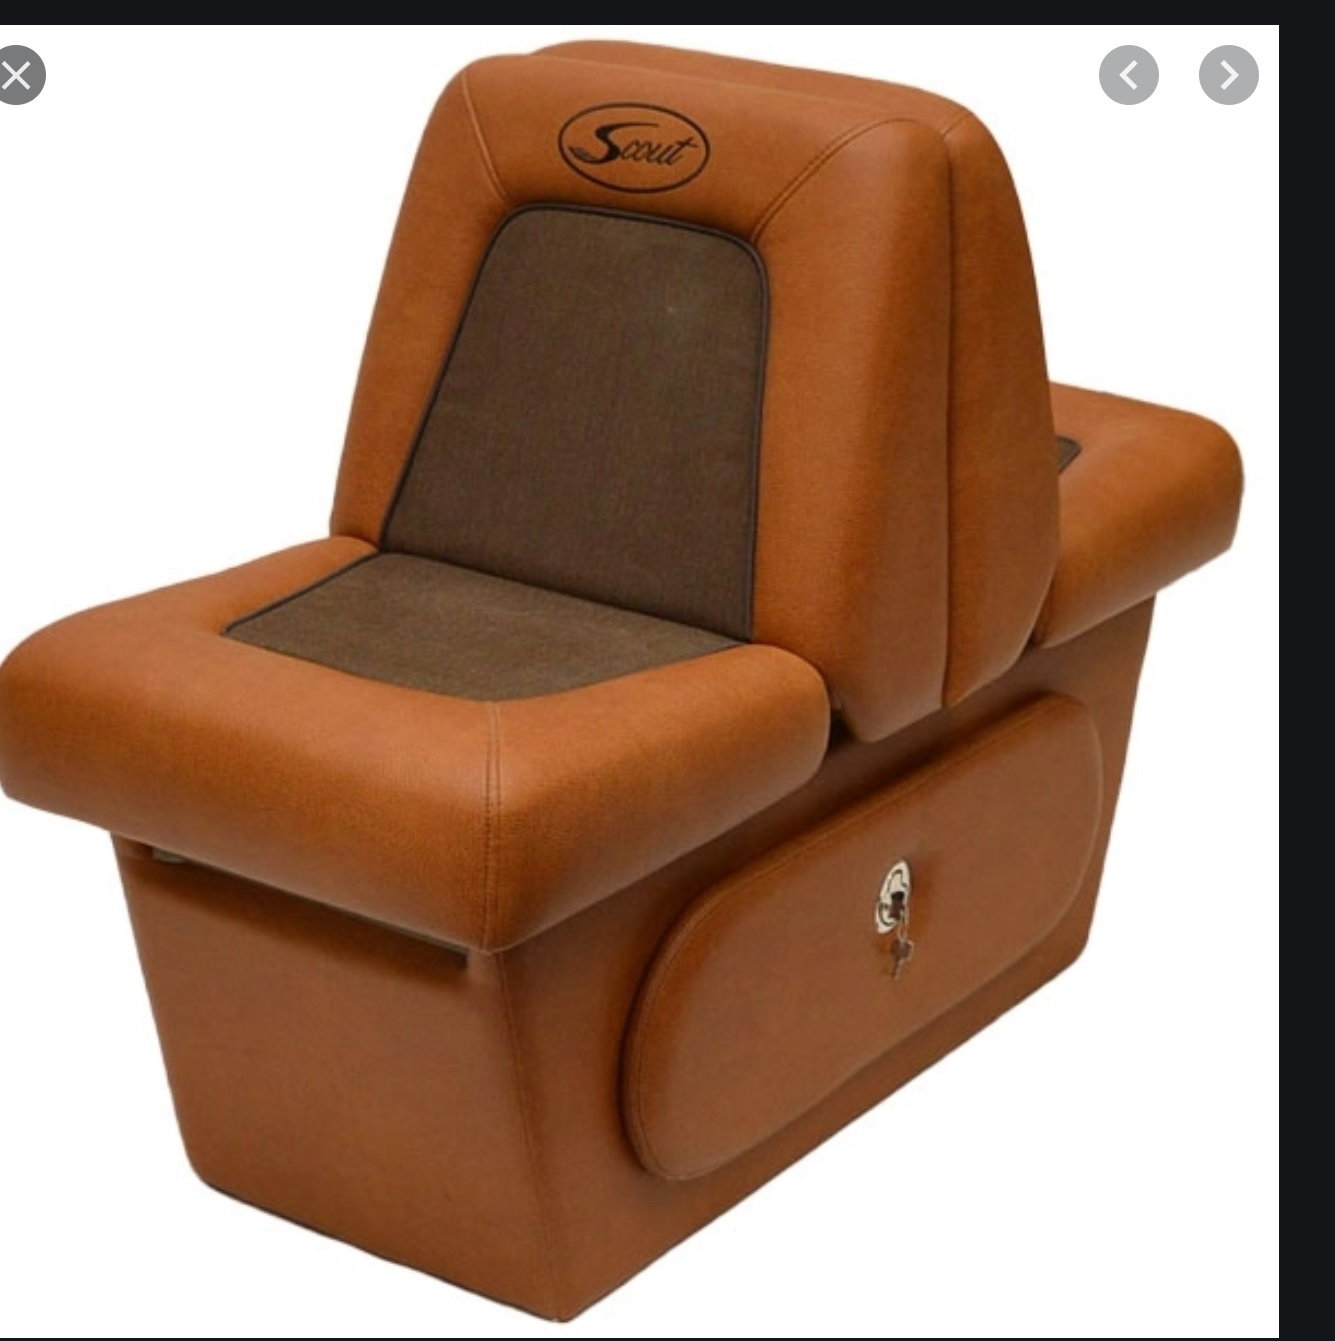 Back to back lounge boat seats - The Hull Truth - Boating and Fishing Forum